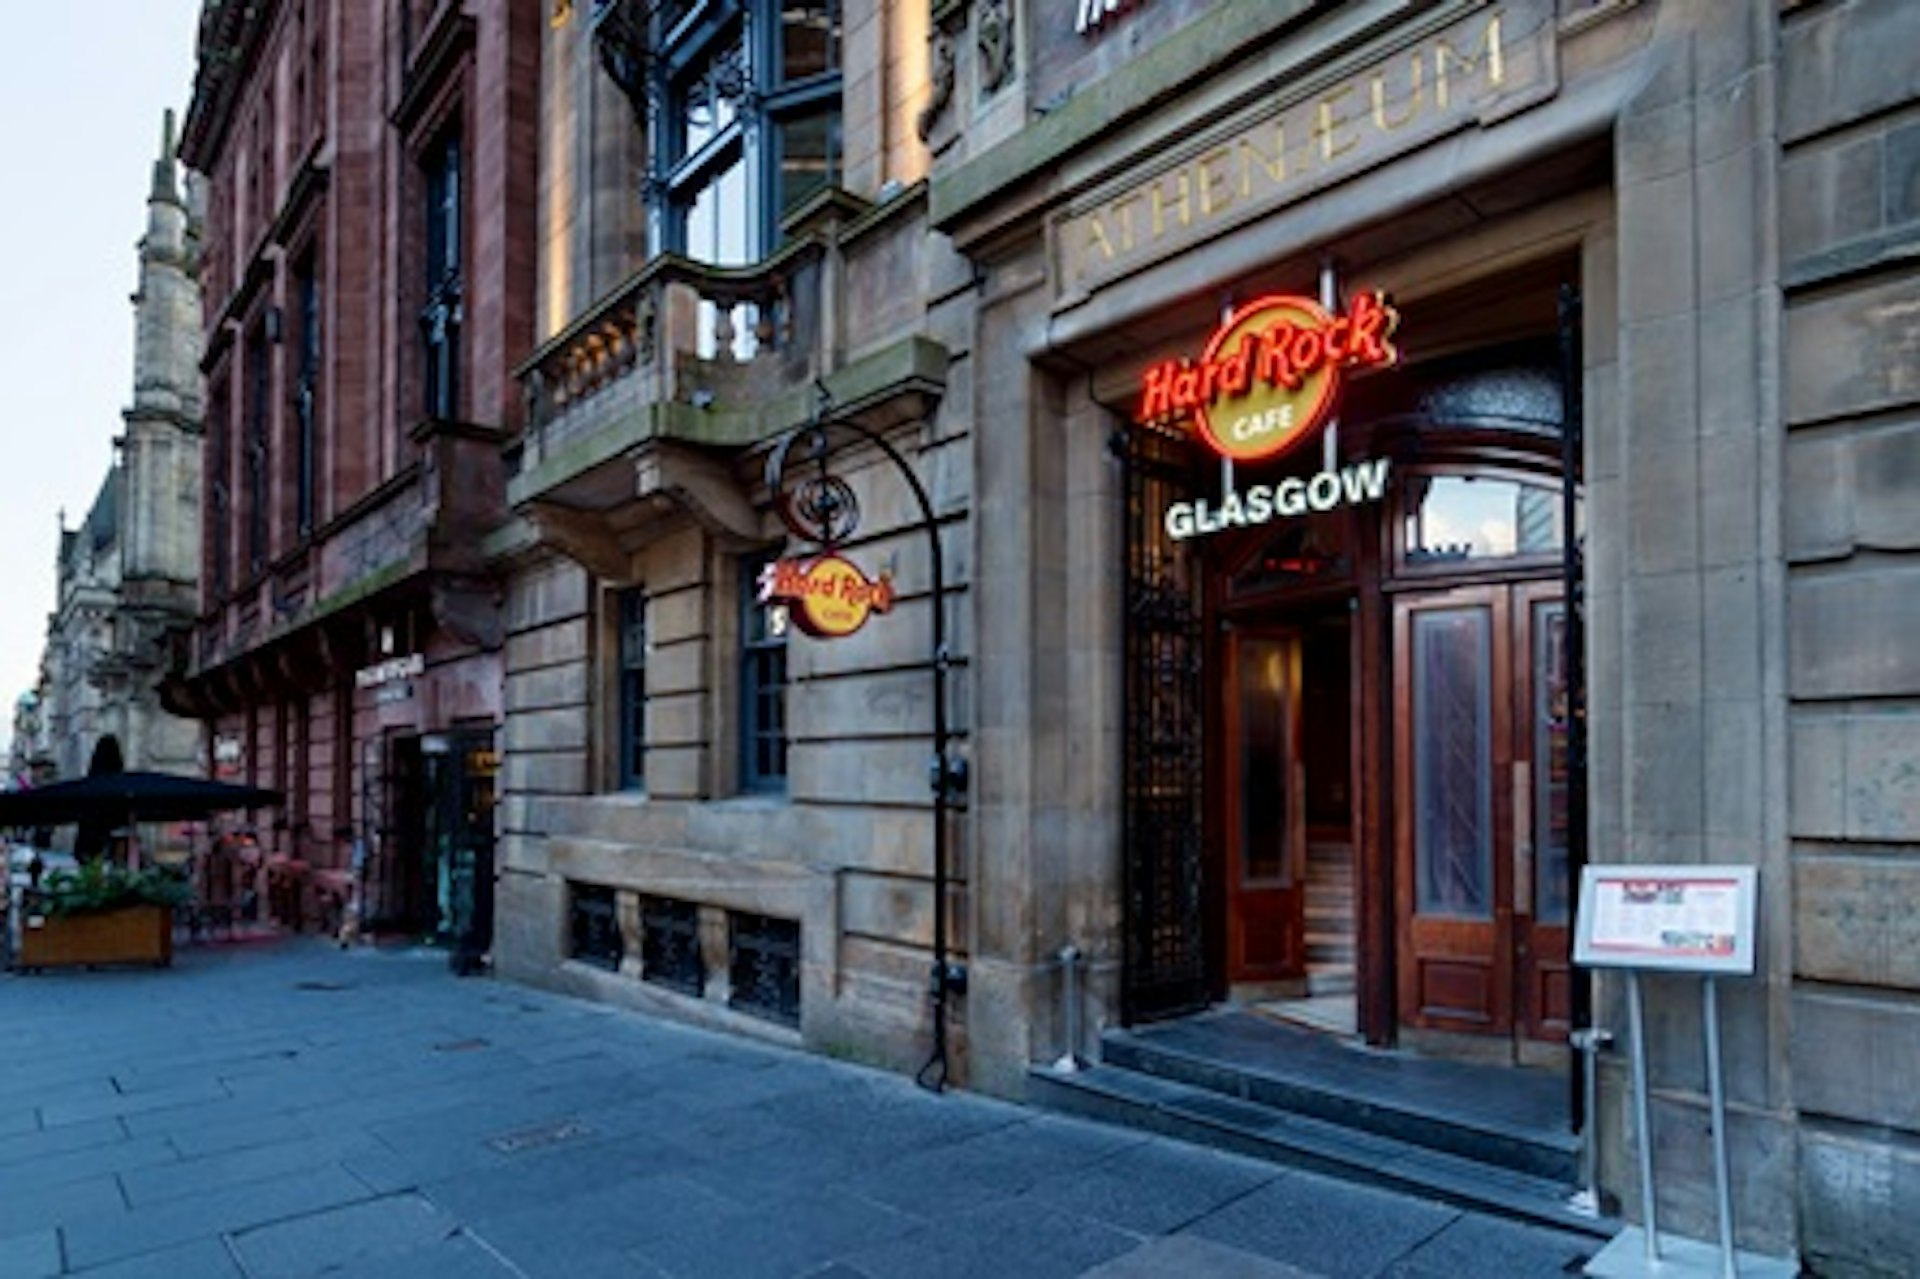 Hard Rock Cafe Glasgow Dining Experience for Two 4